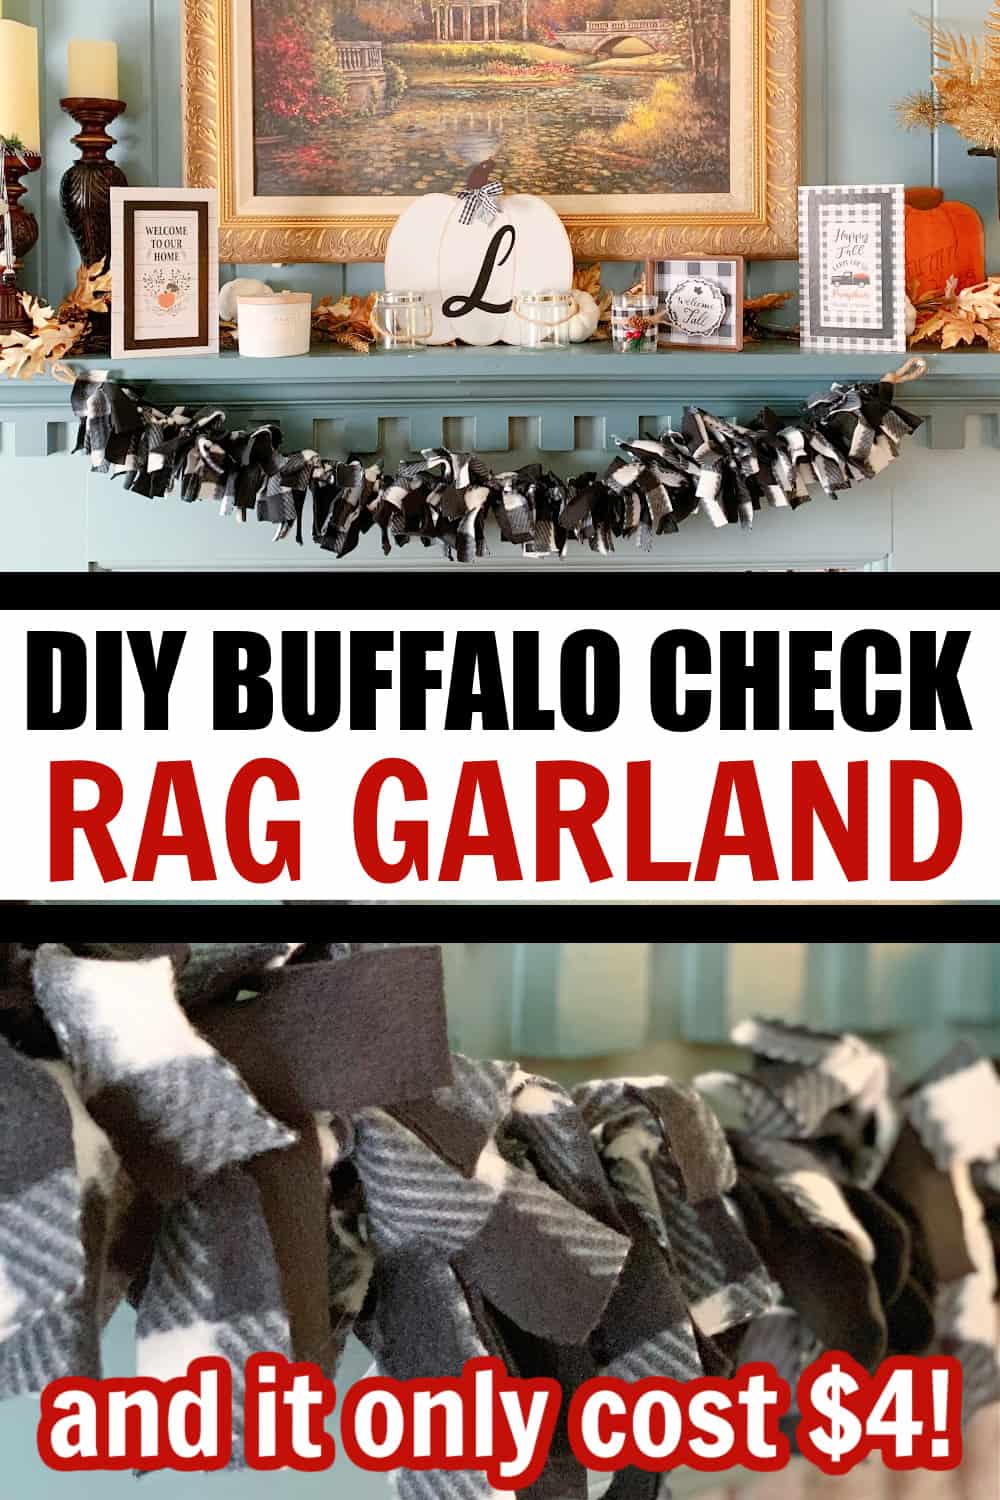 Want to make a super easy, super affordable DIY Buffalo Check rag garland that looks expensive? Here's my simple tutorial. - and it only cost $4 to make! #DIYRagGarland #BuffaloCheck #DIYGarland #ShabbyChicGarland #FarmhouseGarland #DollarTreeCrafts